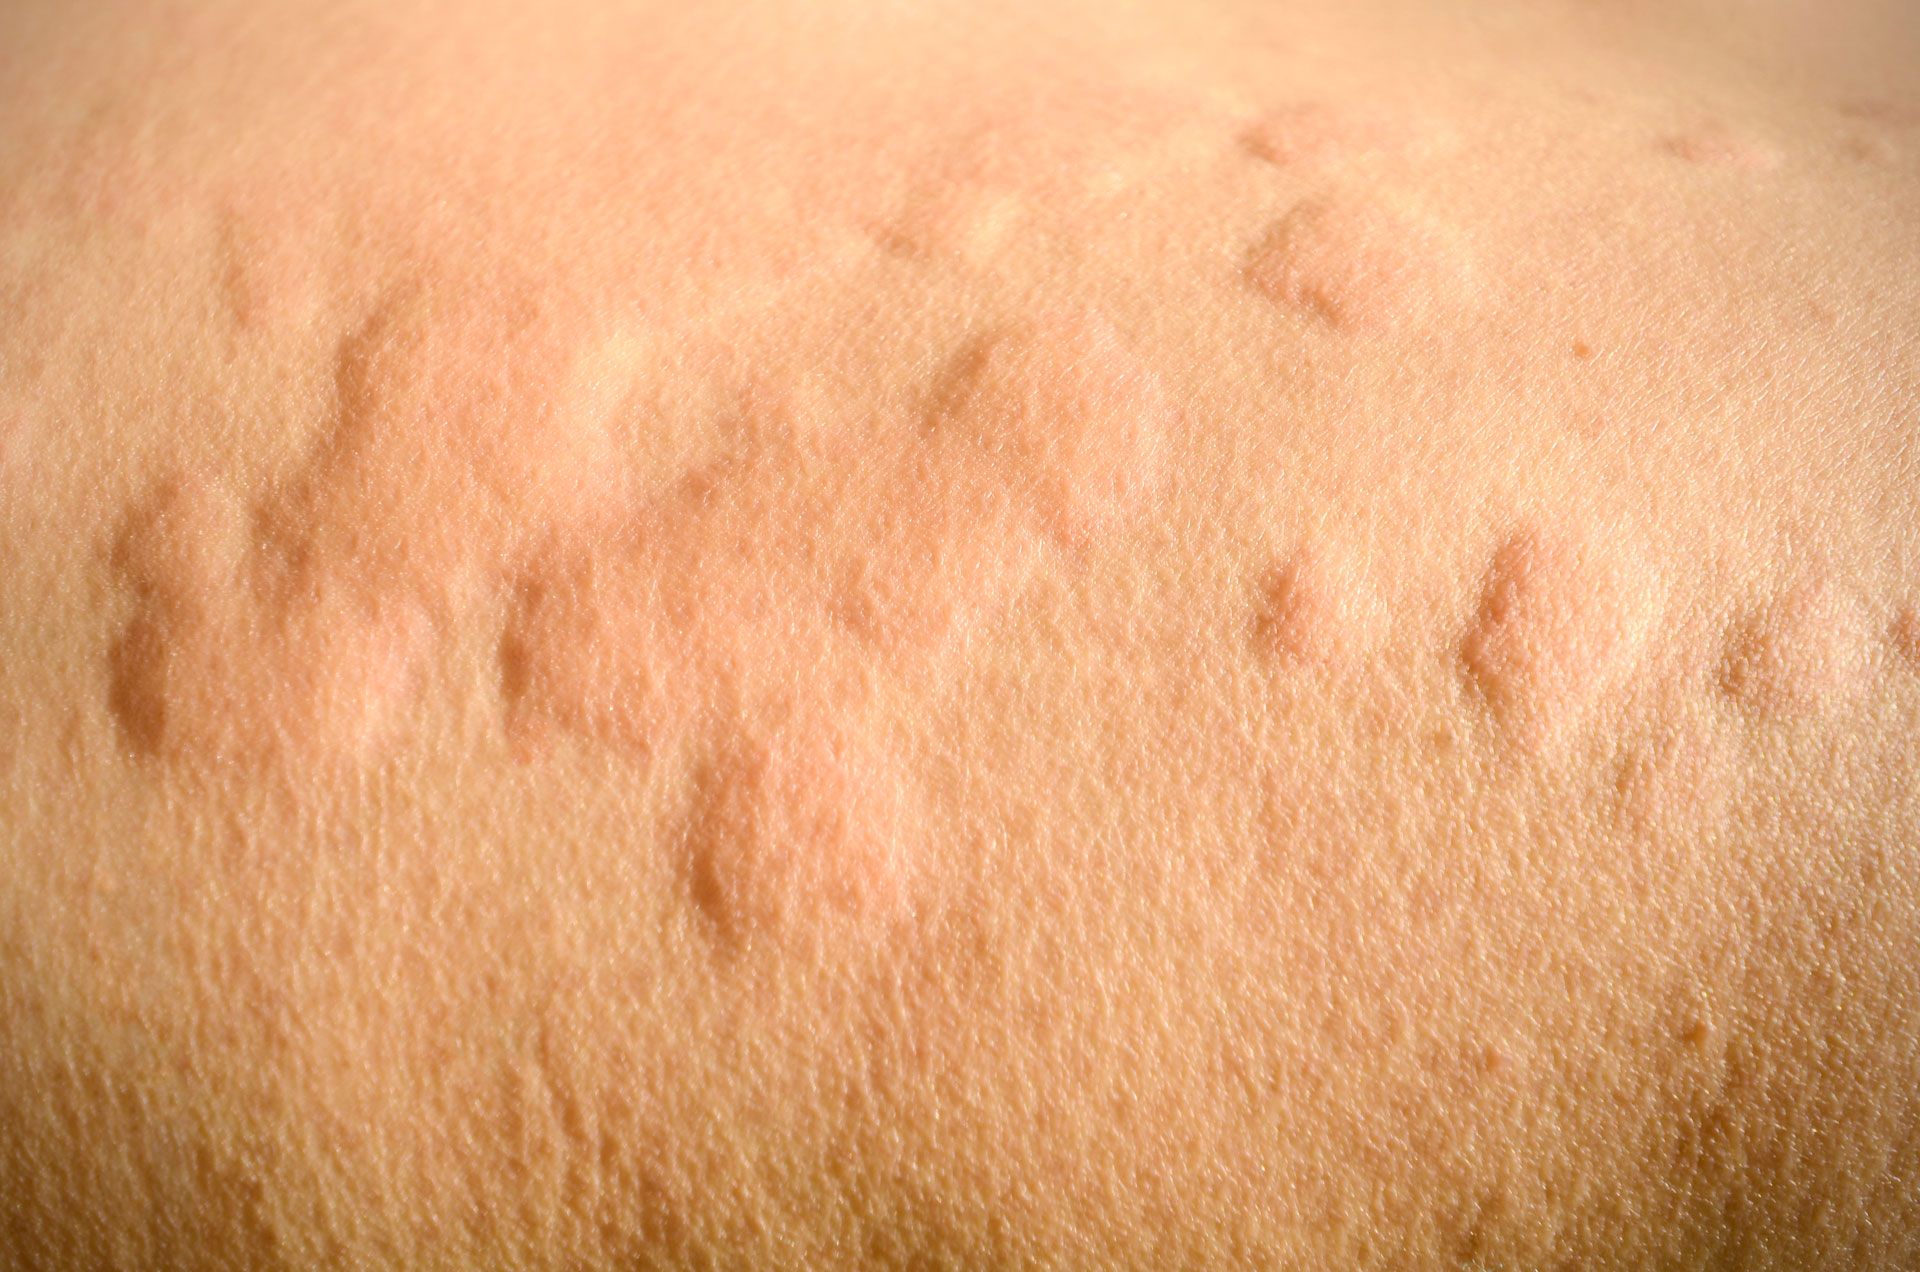 An up close photograph of raised hives on yellow-pink skin.